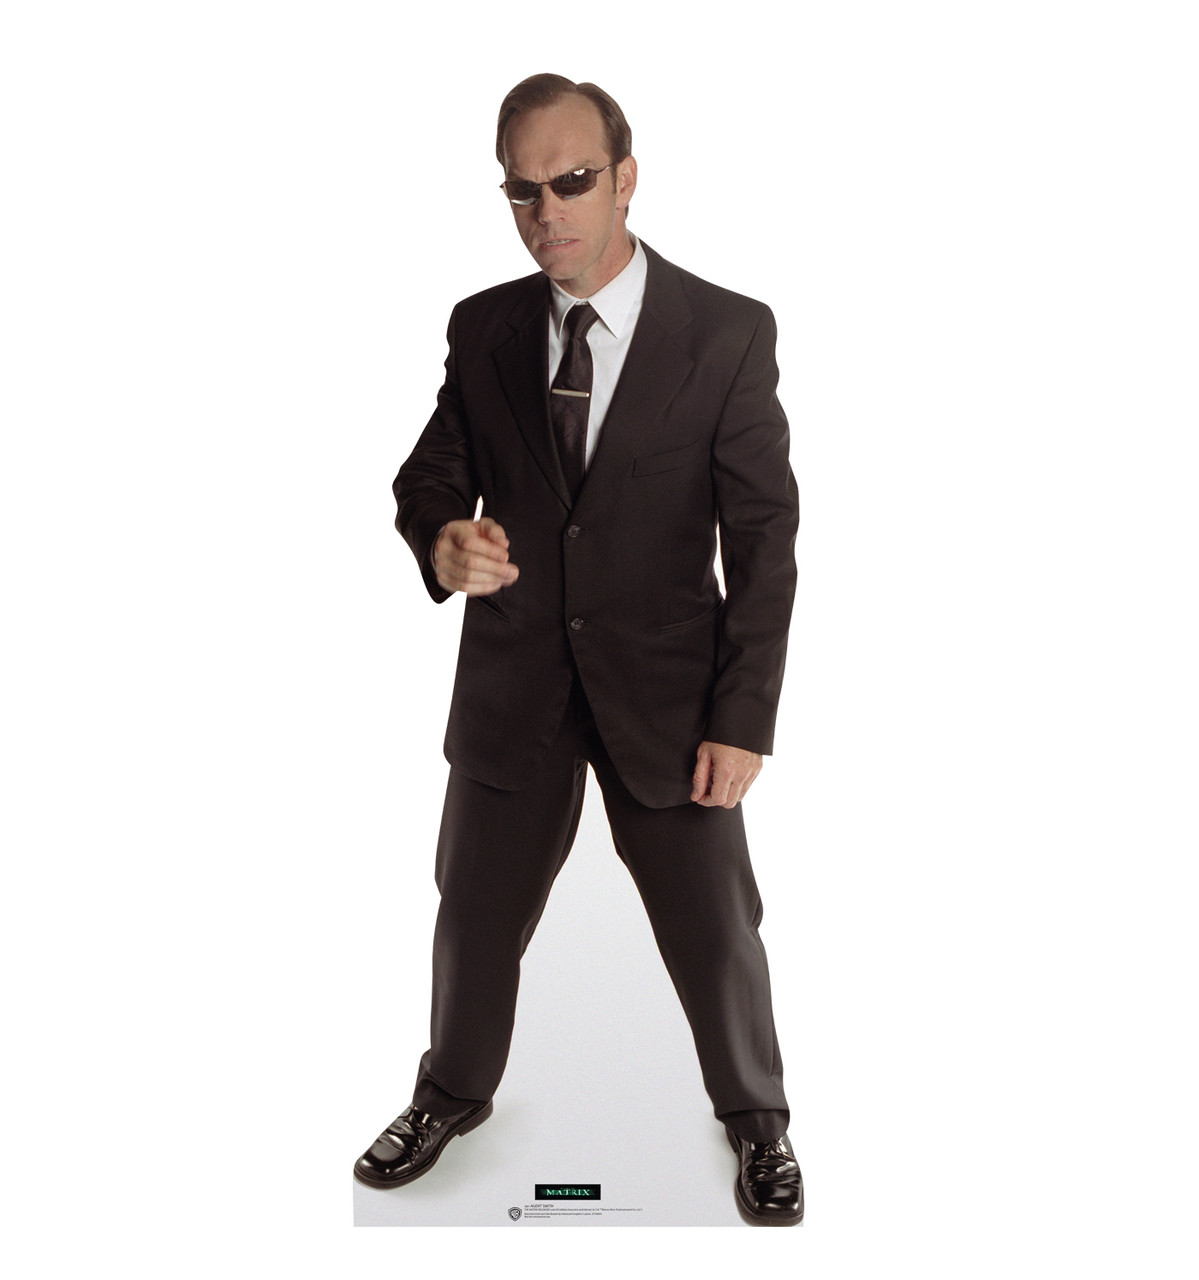 Life-size Cardboard Cutout of Agent Smith | 3801